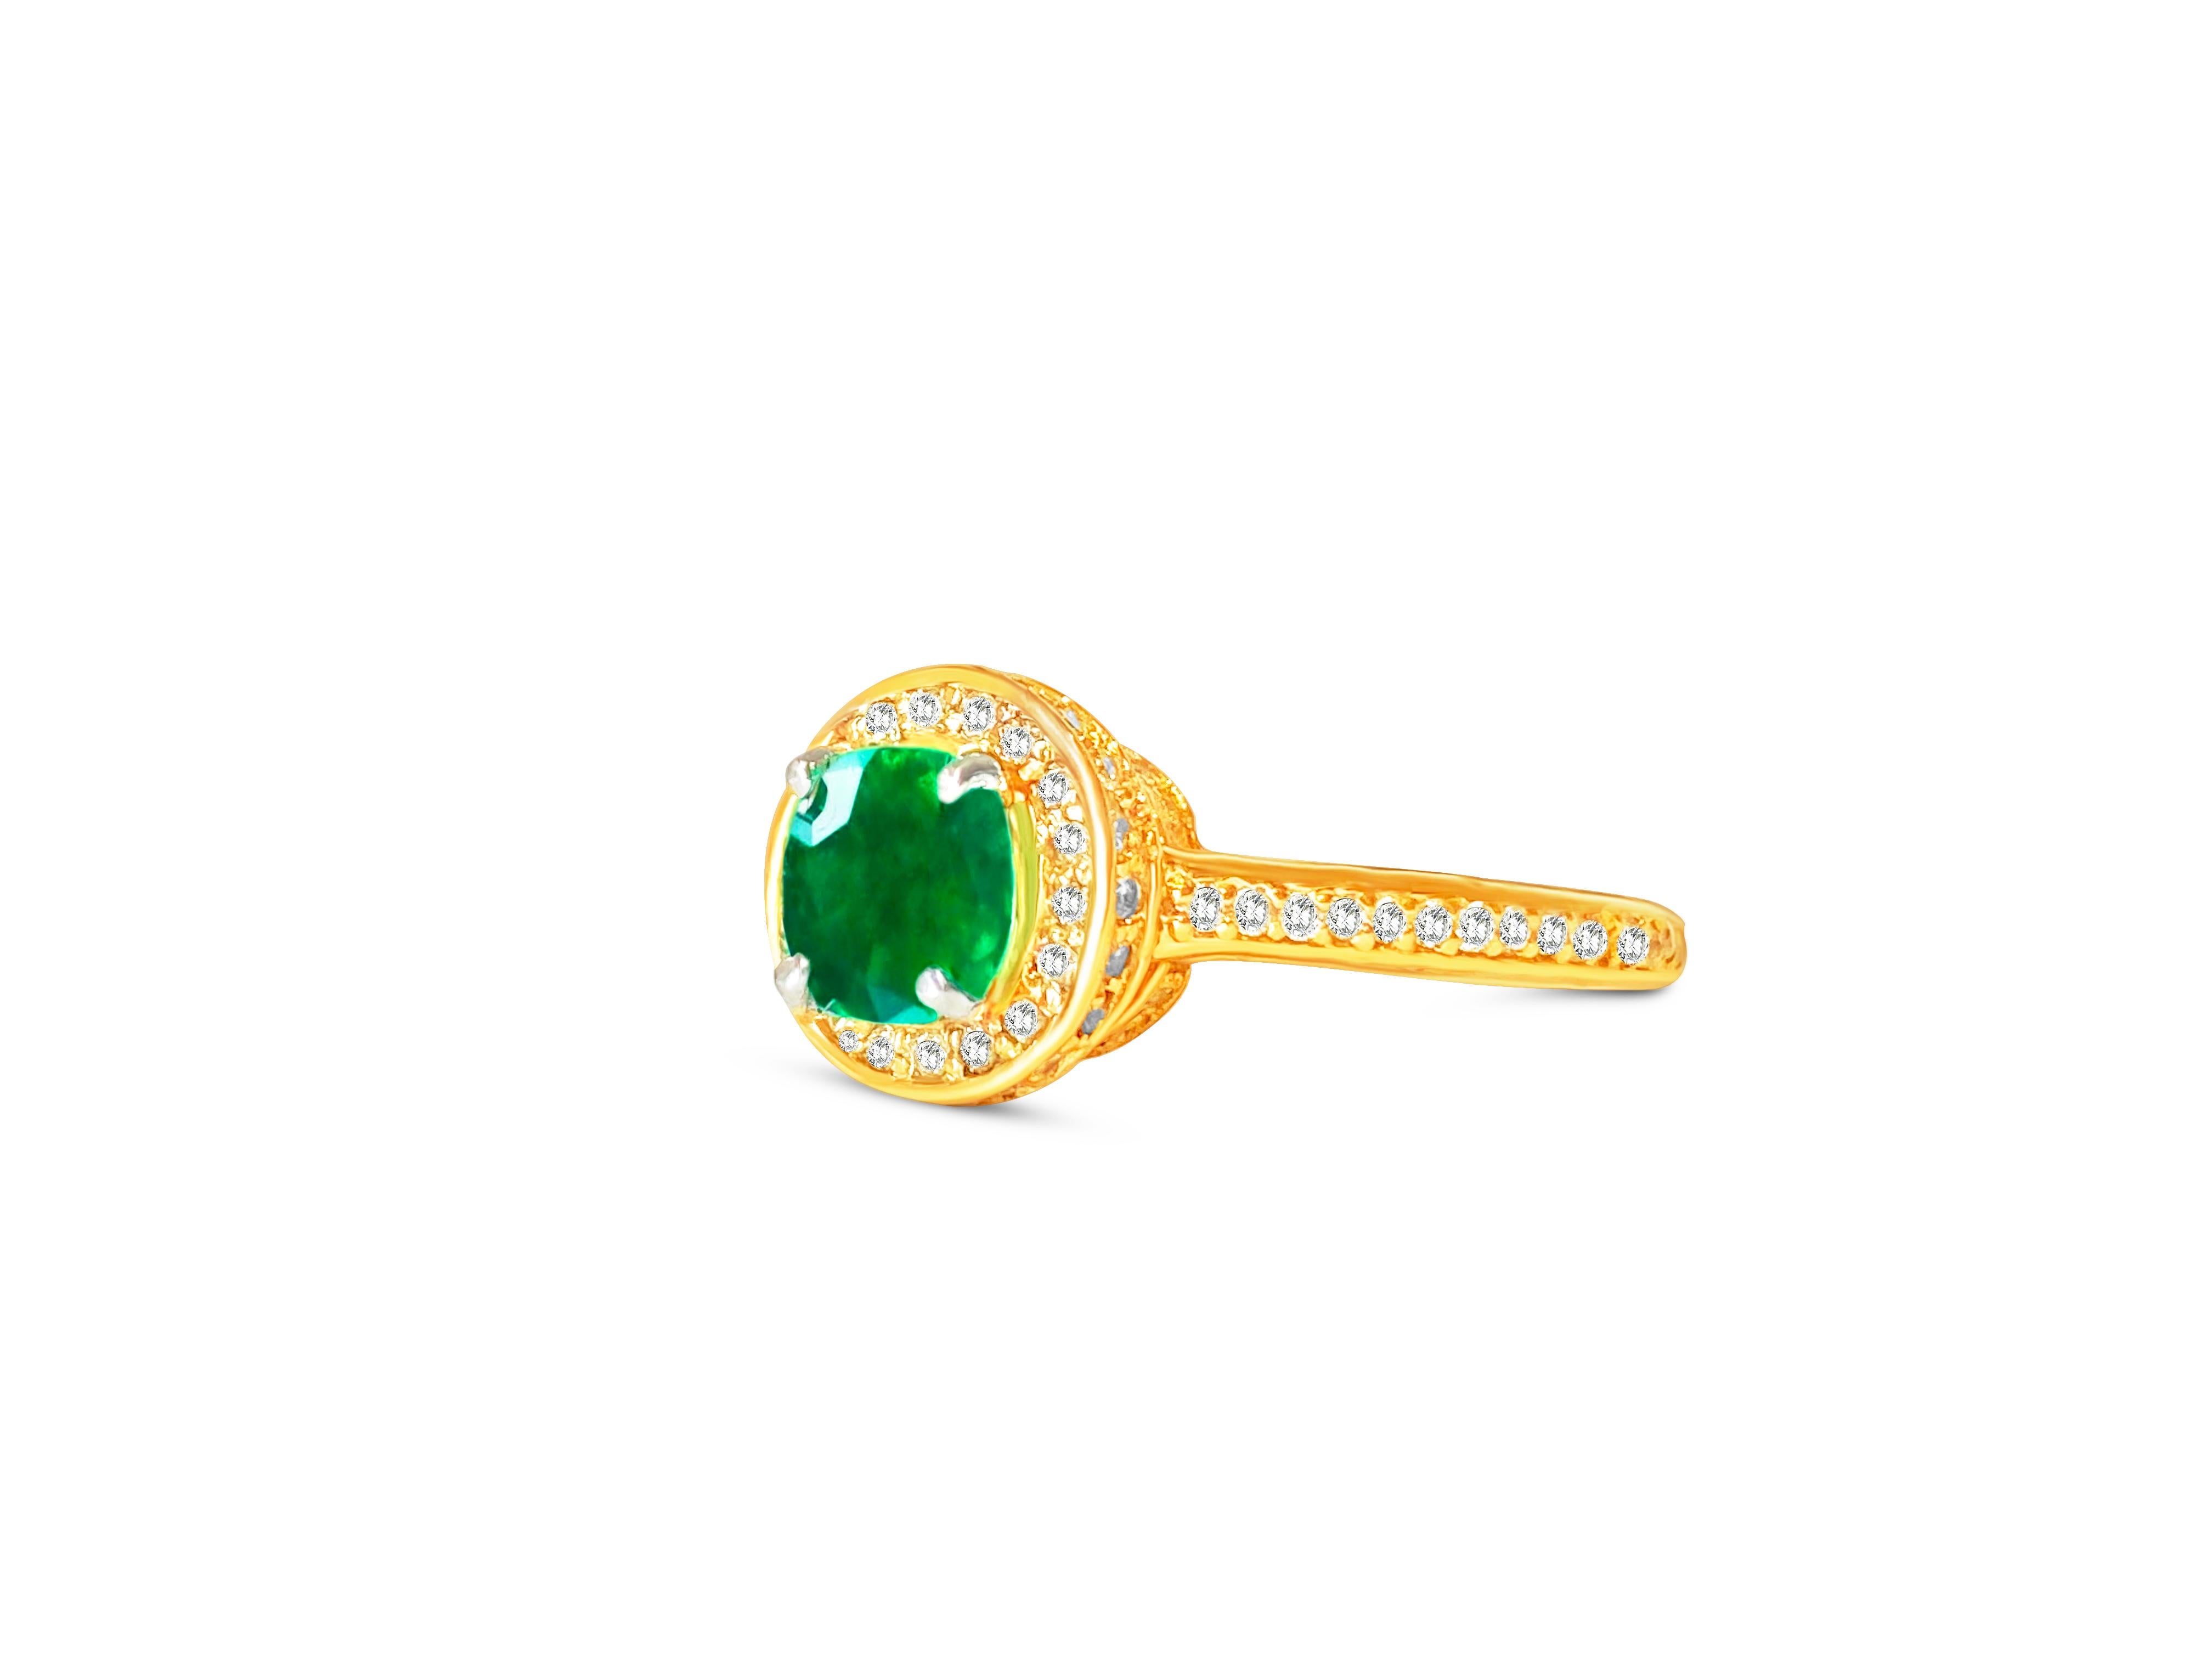 Indulge in elegant 14k rose gold, this engagement ring features a captivating 1.25 carat Colombian emerald at its center, set in a delicate prong setting. Surrounding the emerald are shimmering diamonds totaling 1.00 carats, exhibiting VS-SI clarity